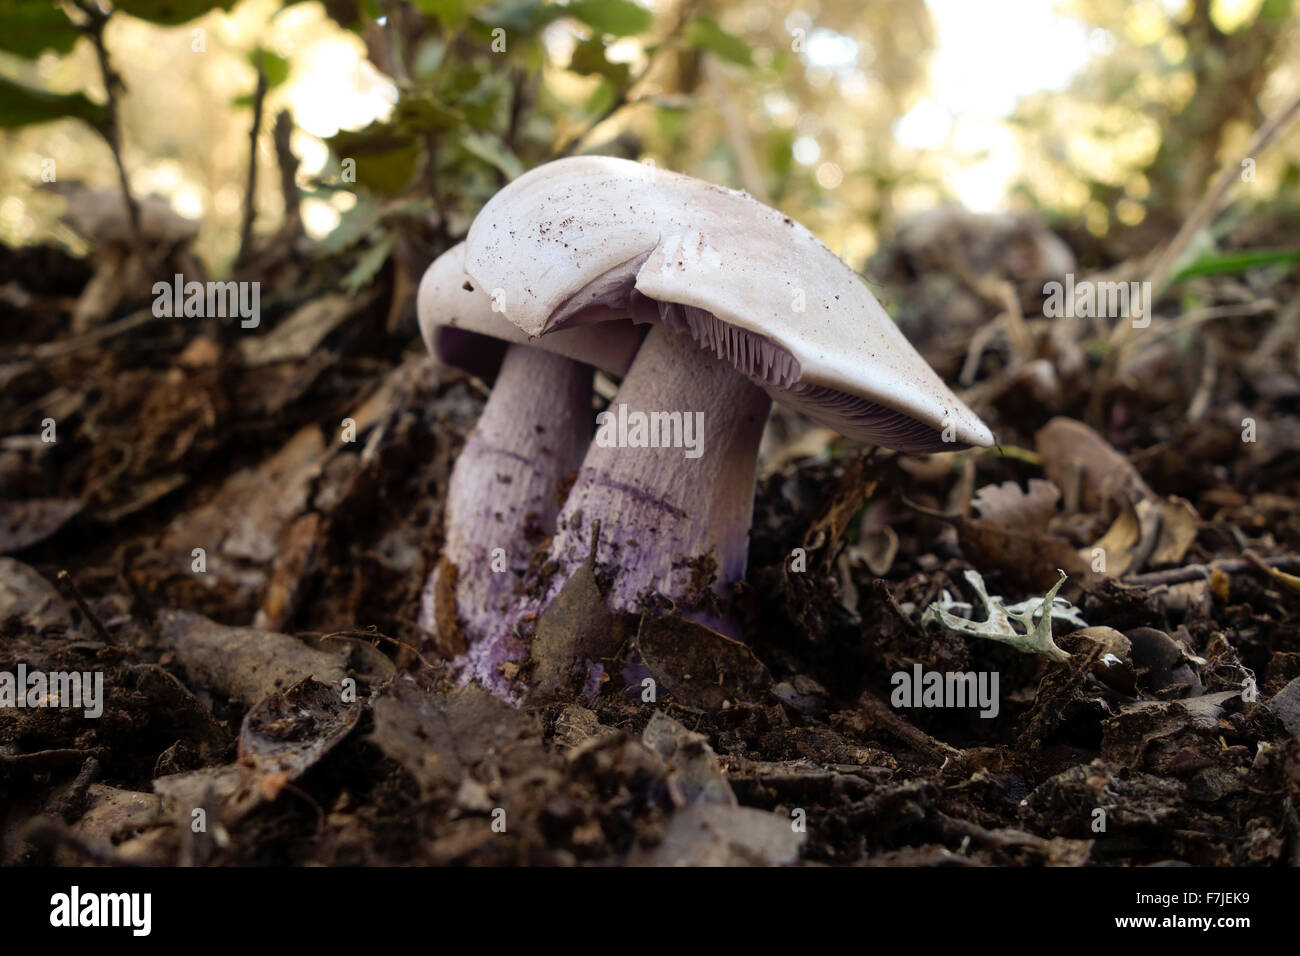 Wood blewit or blue stalk mushroom, Clitocybe nuda, lepista nuda in forest, Andalusia, Spain Stock Photo